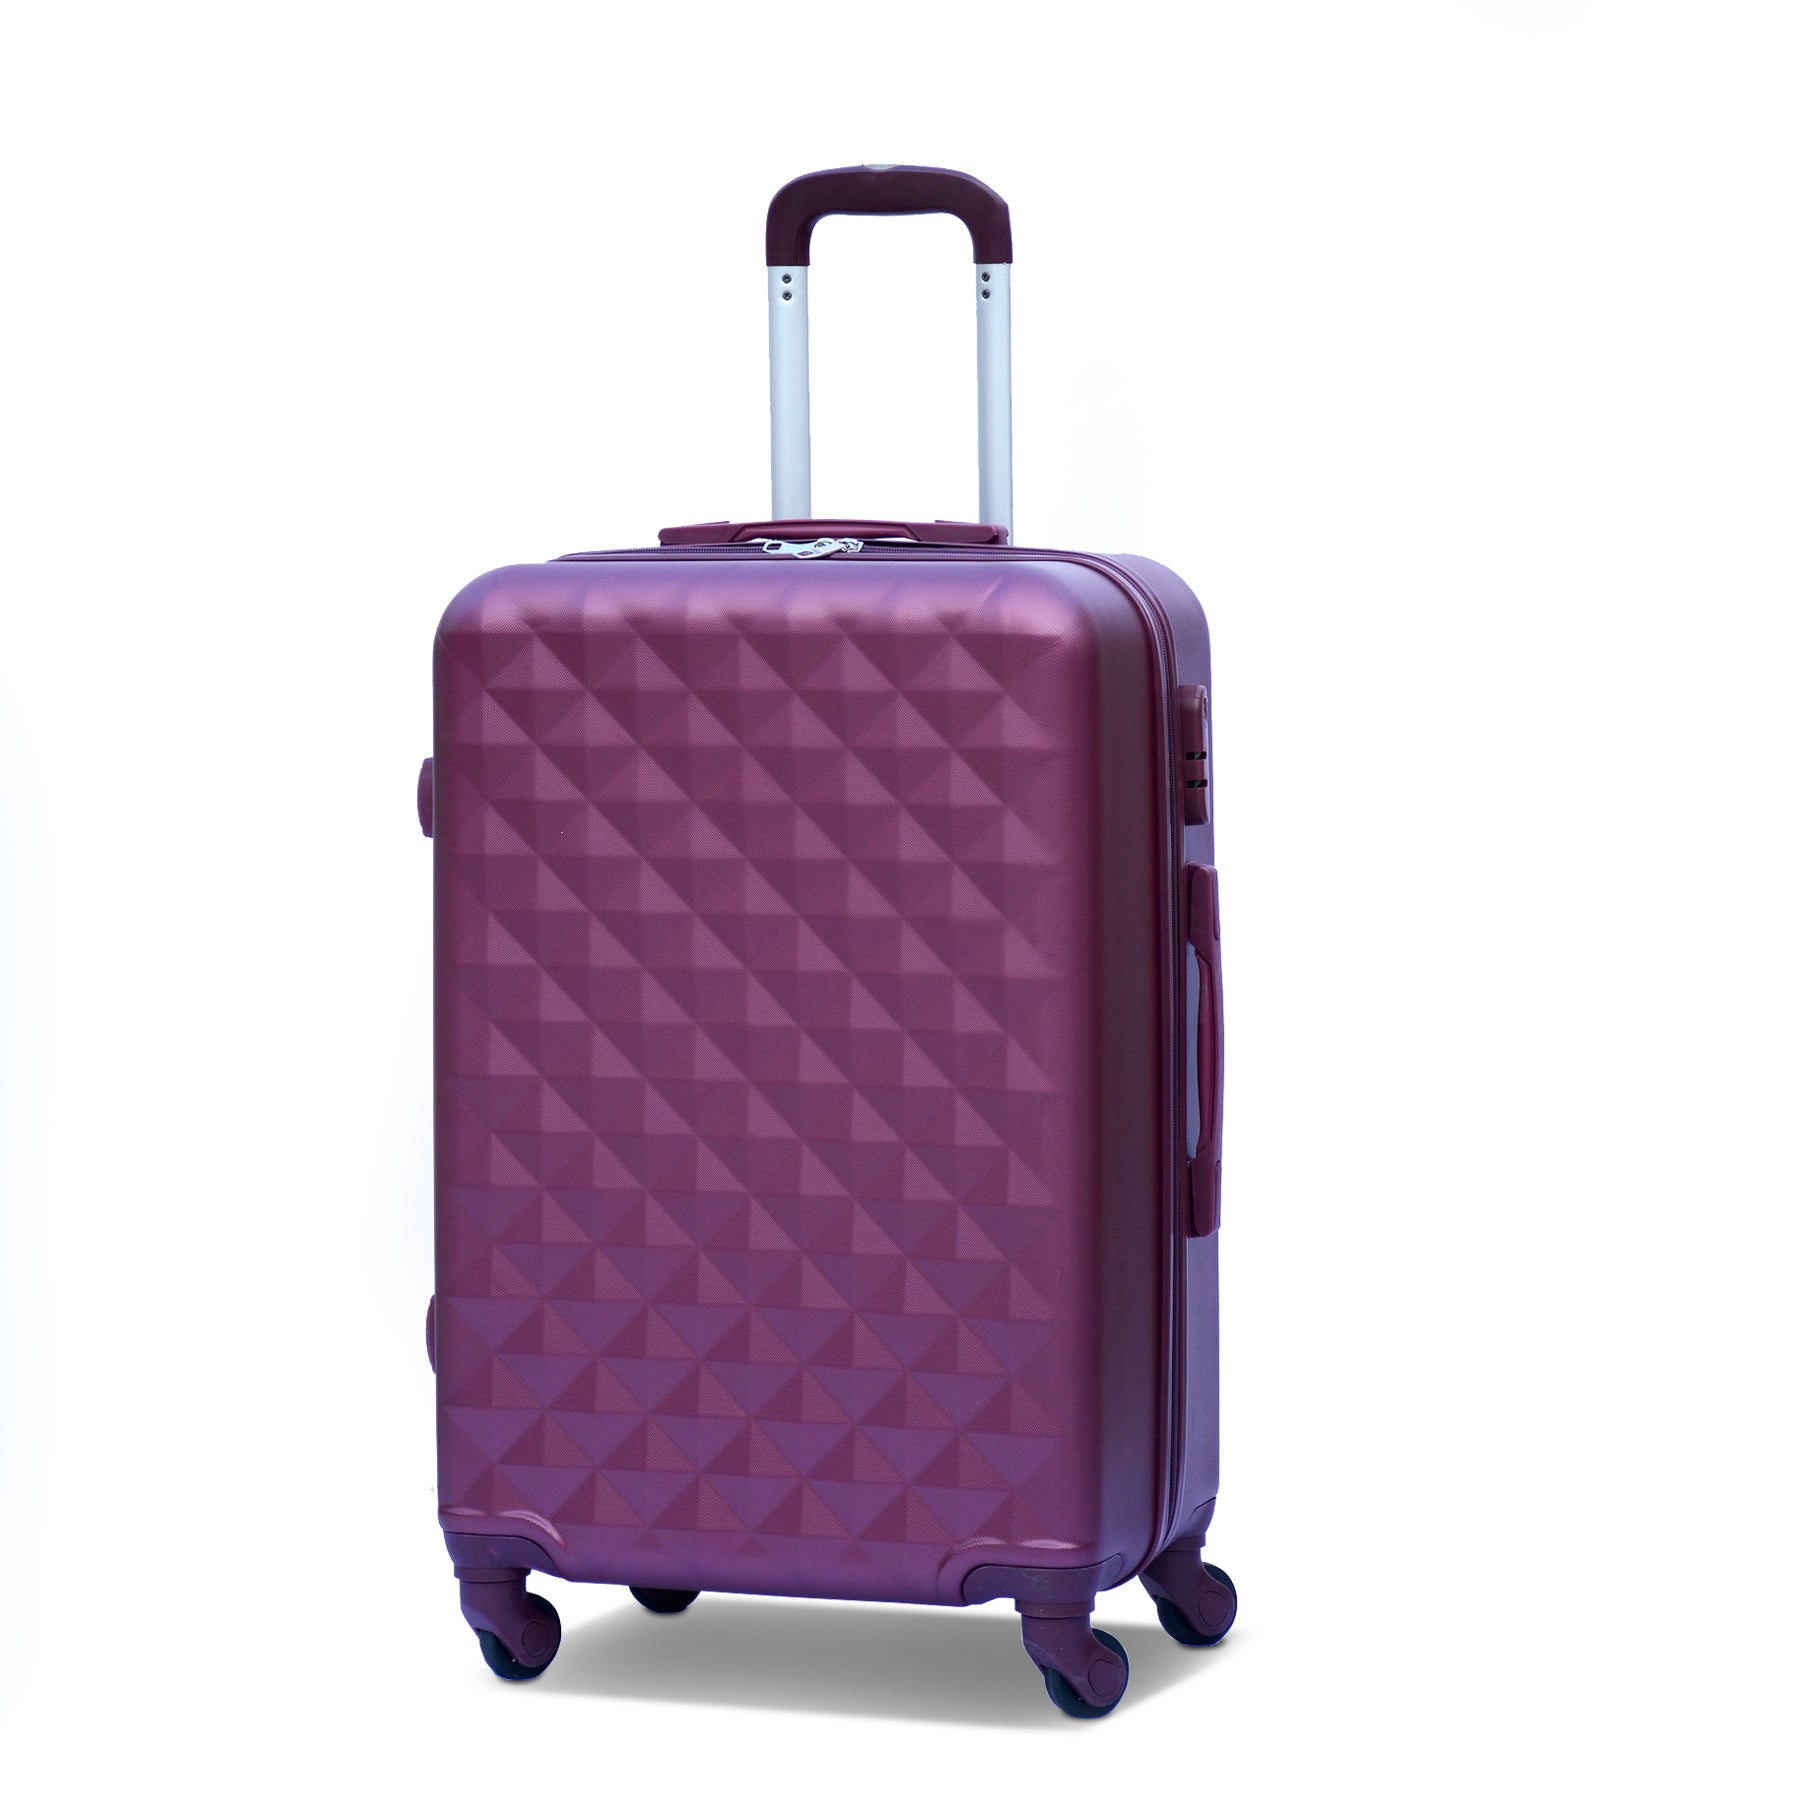 4 Piece Full Set 7" 20" 24" 28 Inches Maroon Colour Diamond Cut ABS Lightweight Luggage Bag With Spinner Wheel Zaappy.com